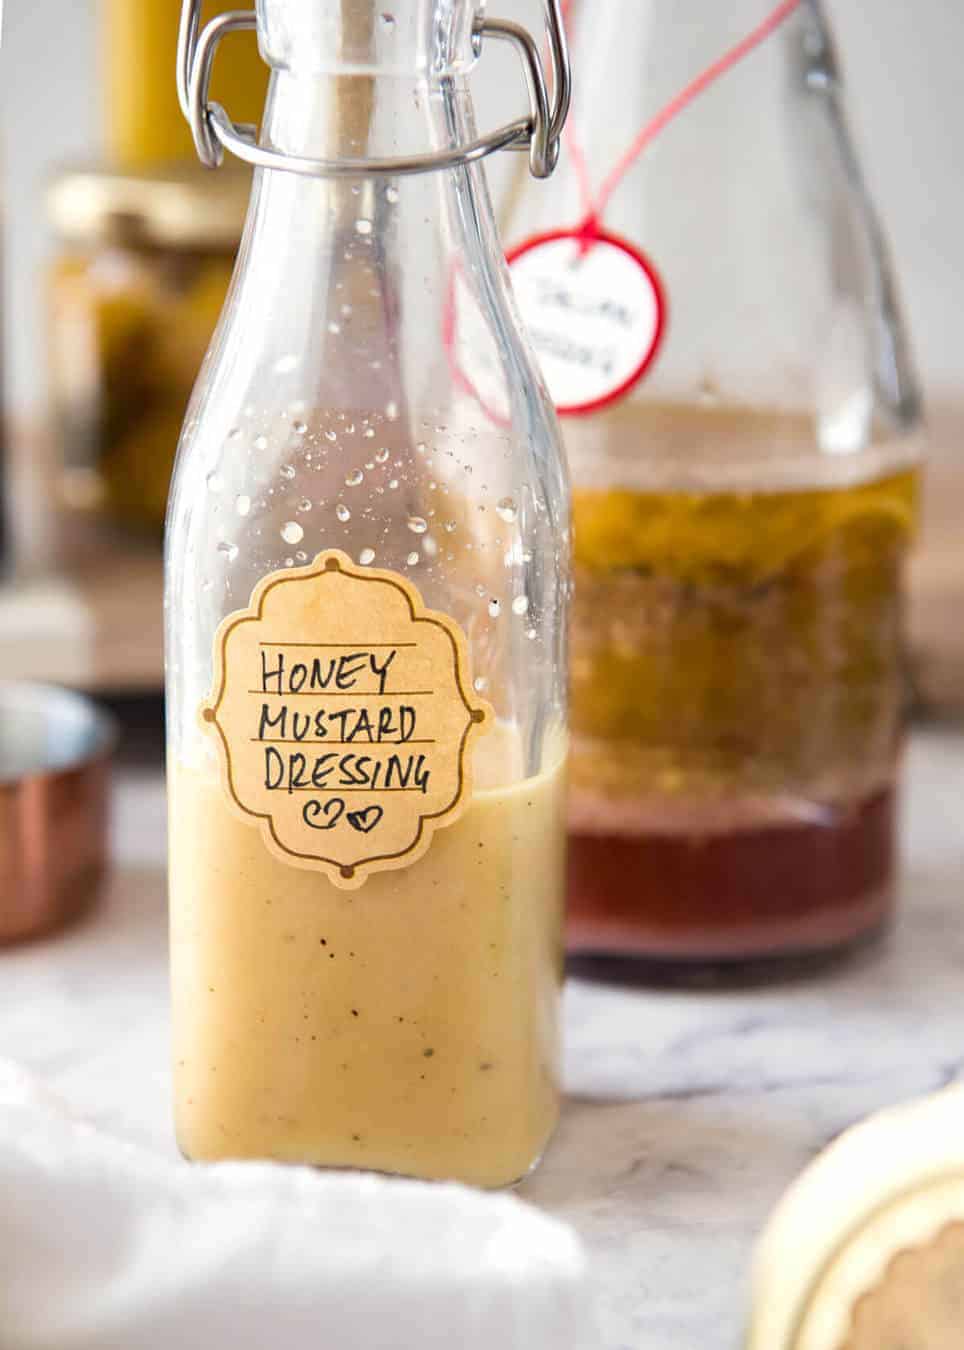 Honey Mustard Dressing - guaranteed crowd pleaser, made with honey, mustard, cider vinegar and olive oil. Keeps for 3 weeks. www.recipetineats.com